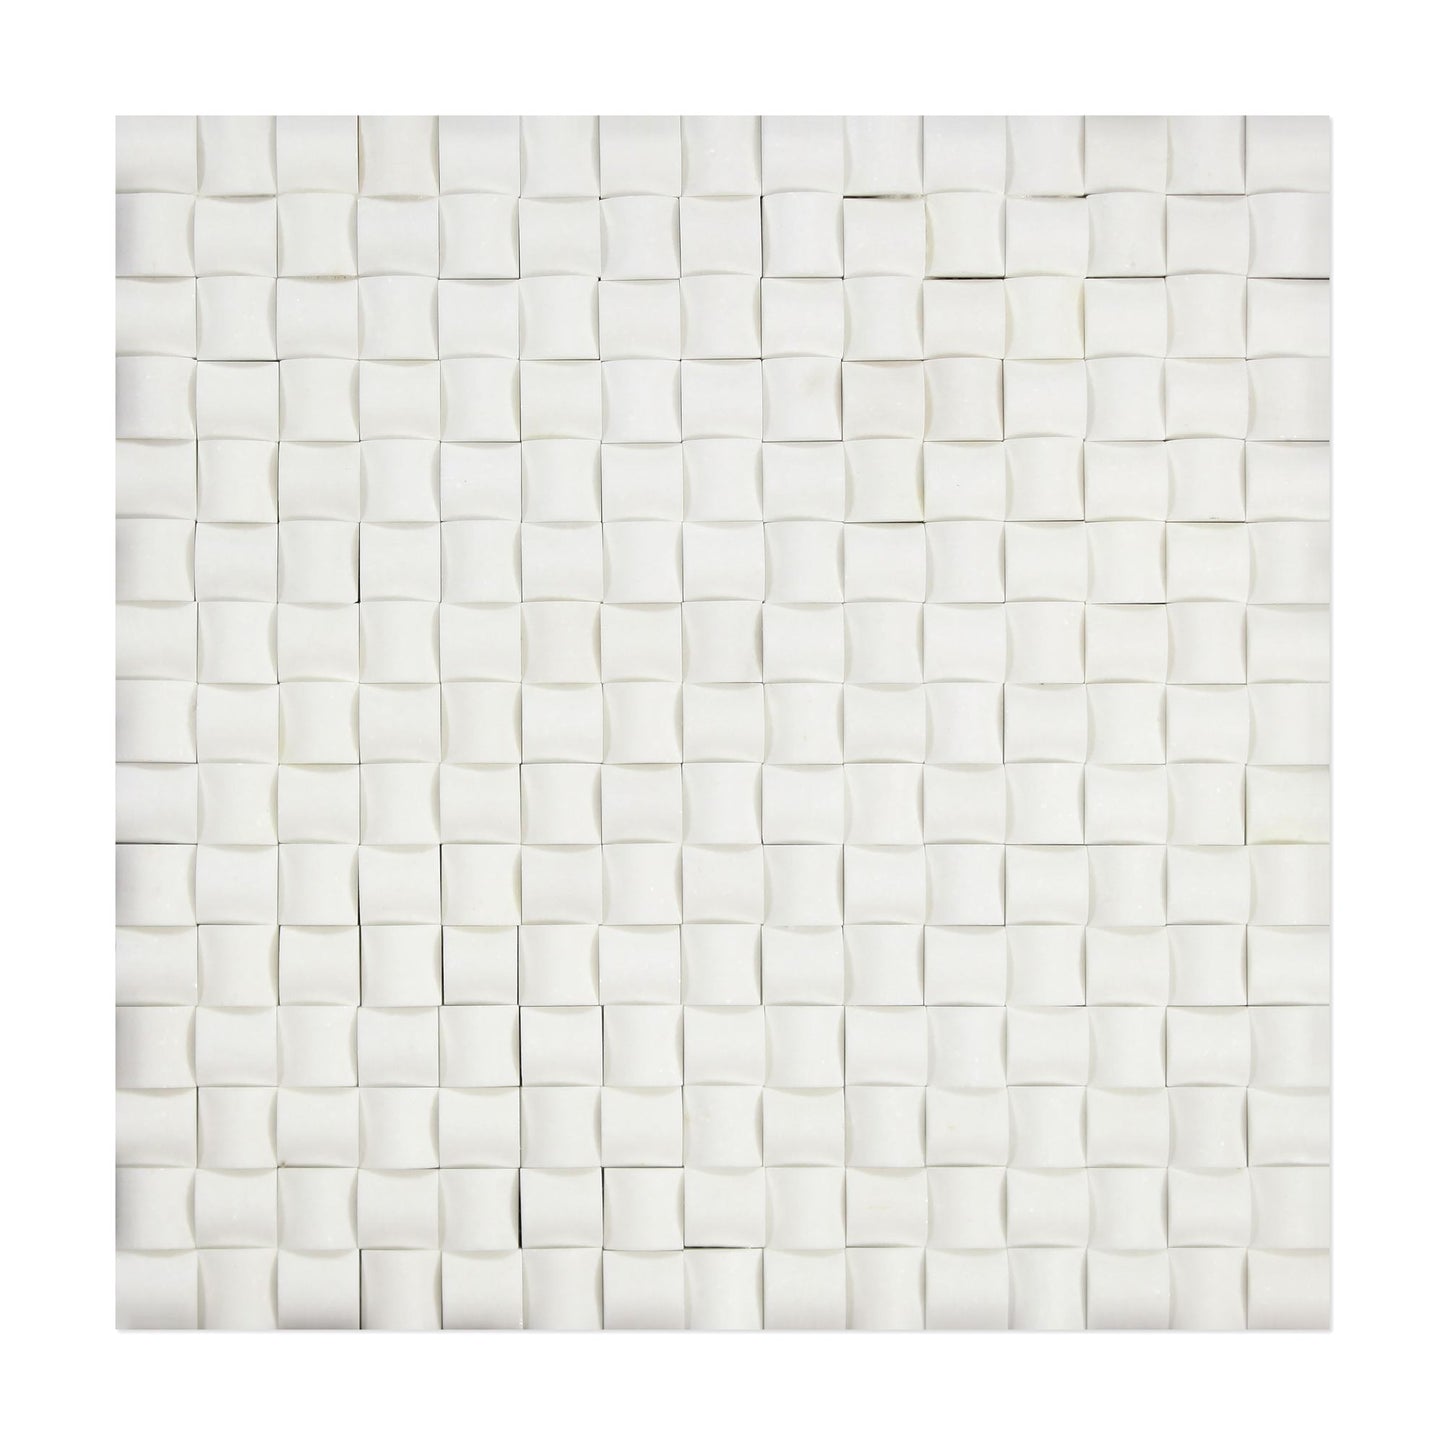 Thassos White 3/8 3D Small-Bread Marble Mosaic Tile